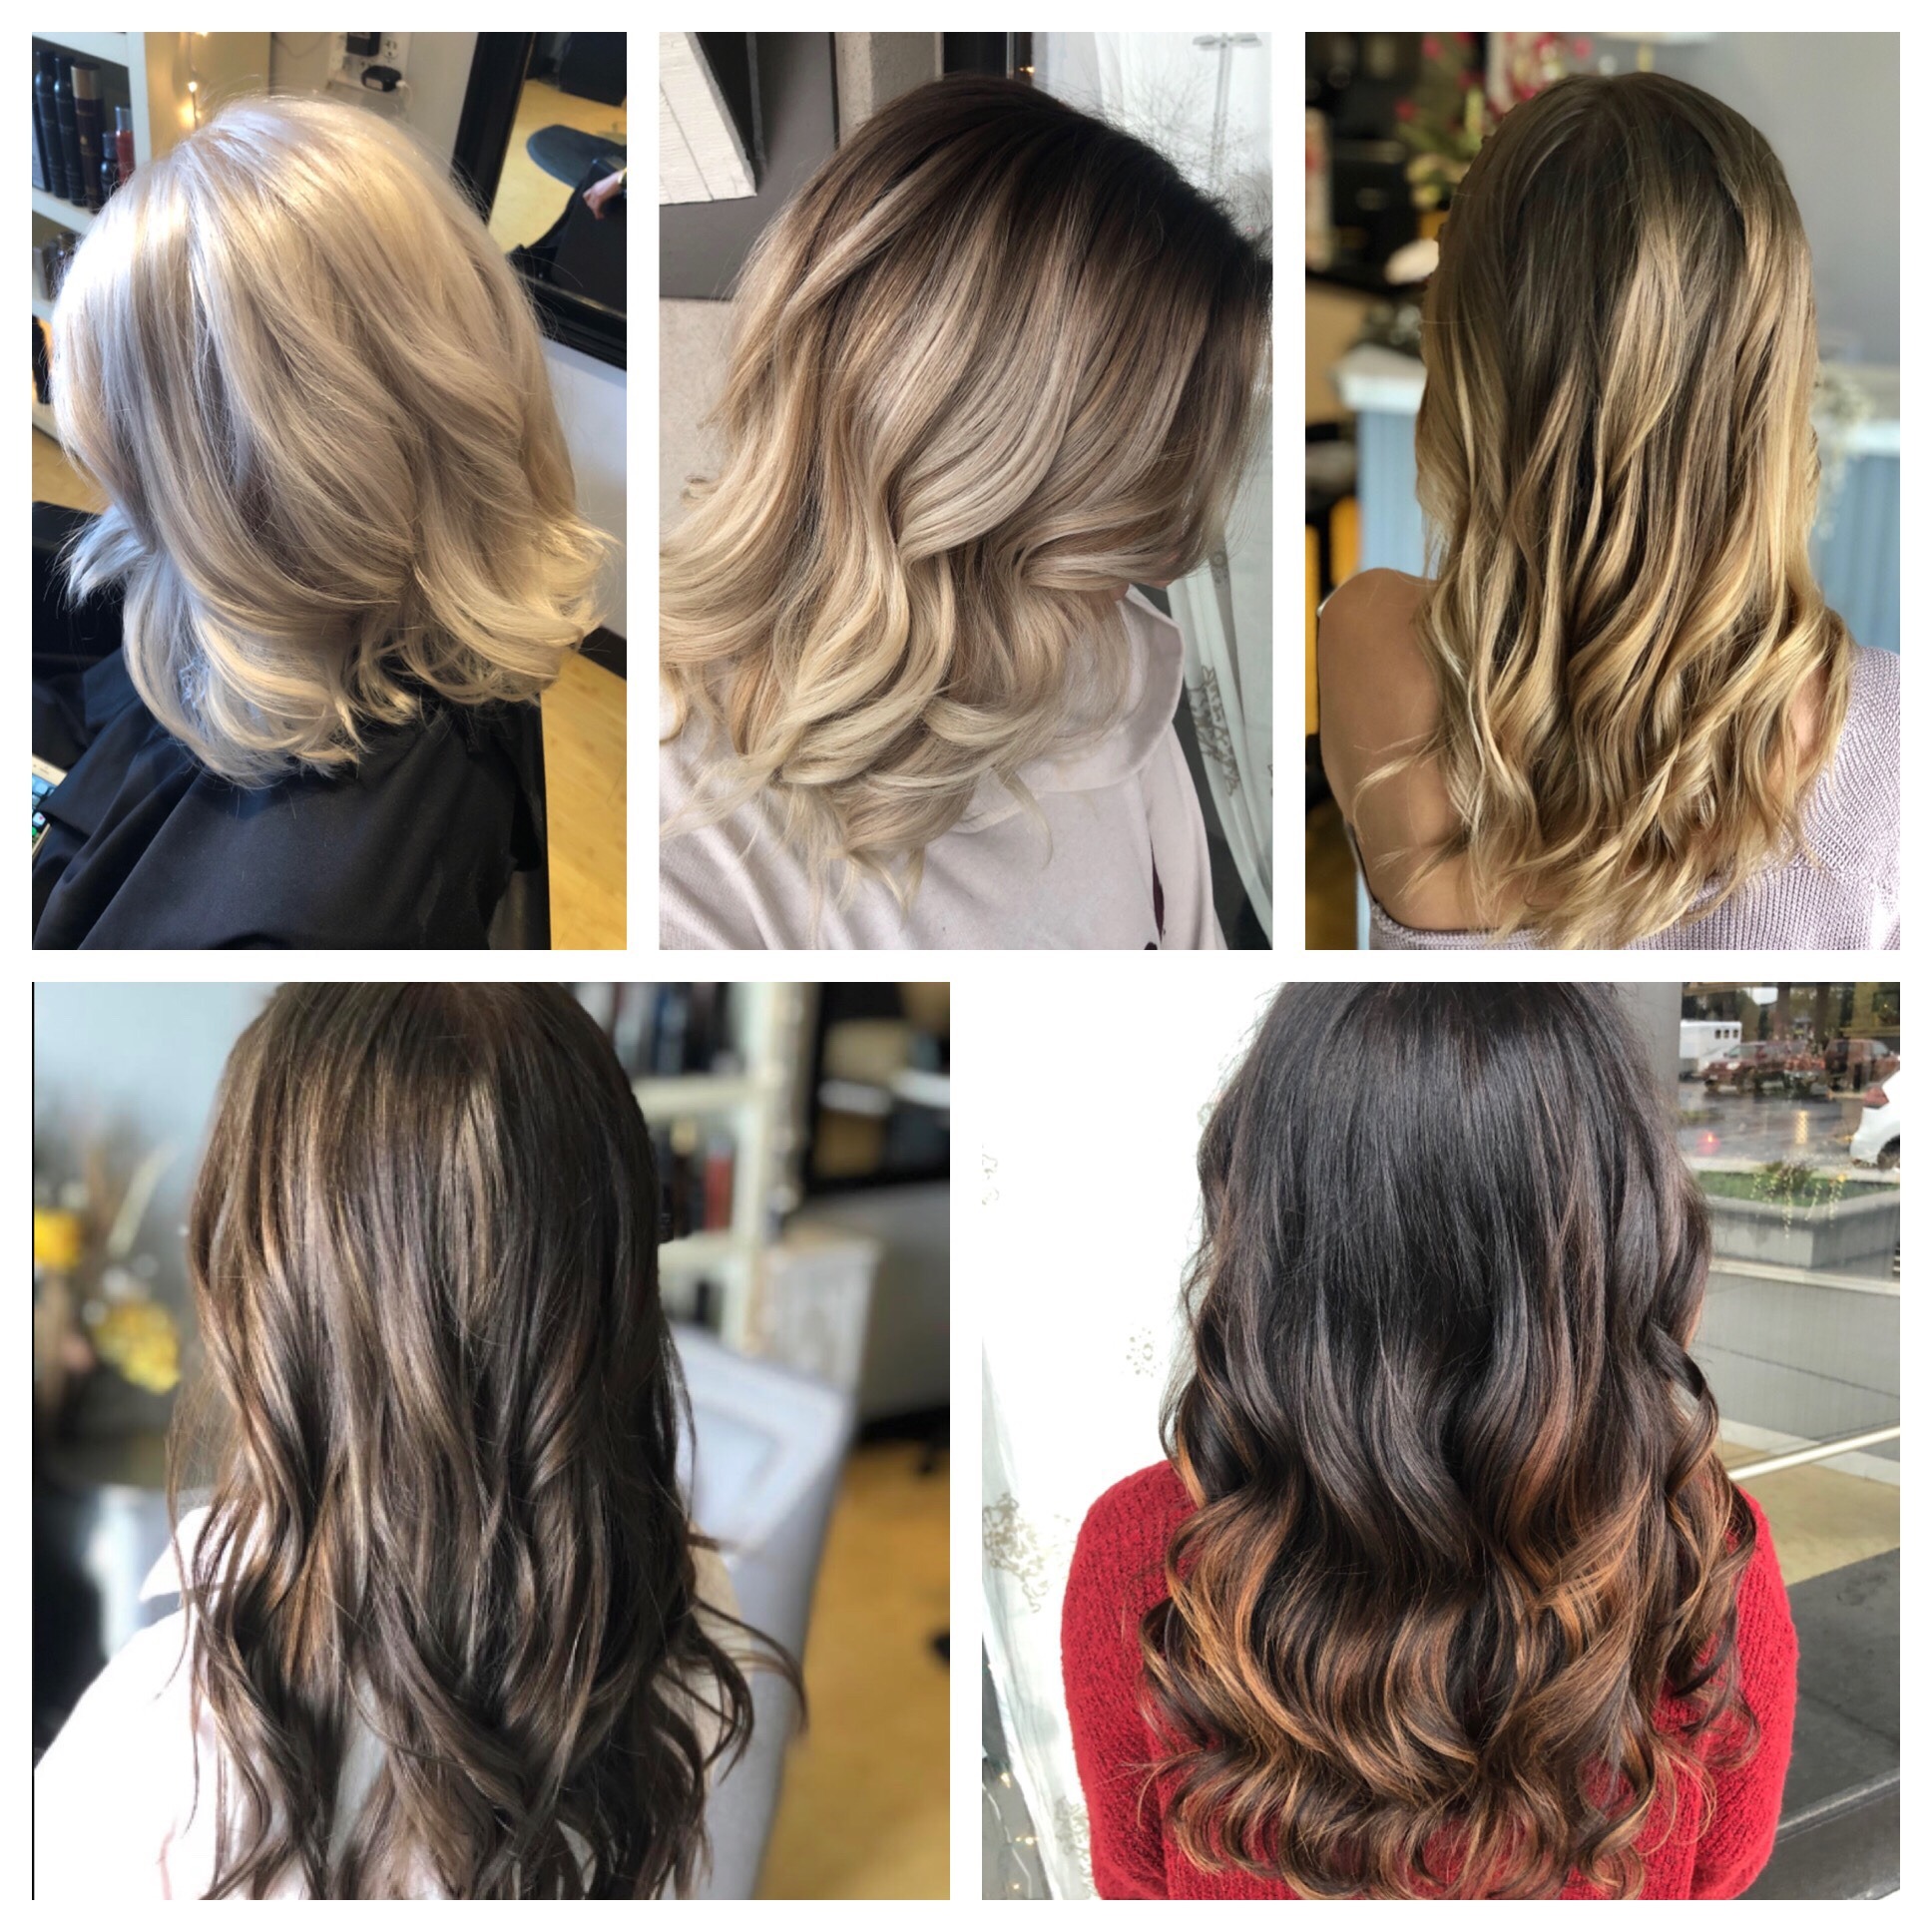 Top 5 Hair Color Trends for Fall 2019